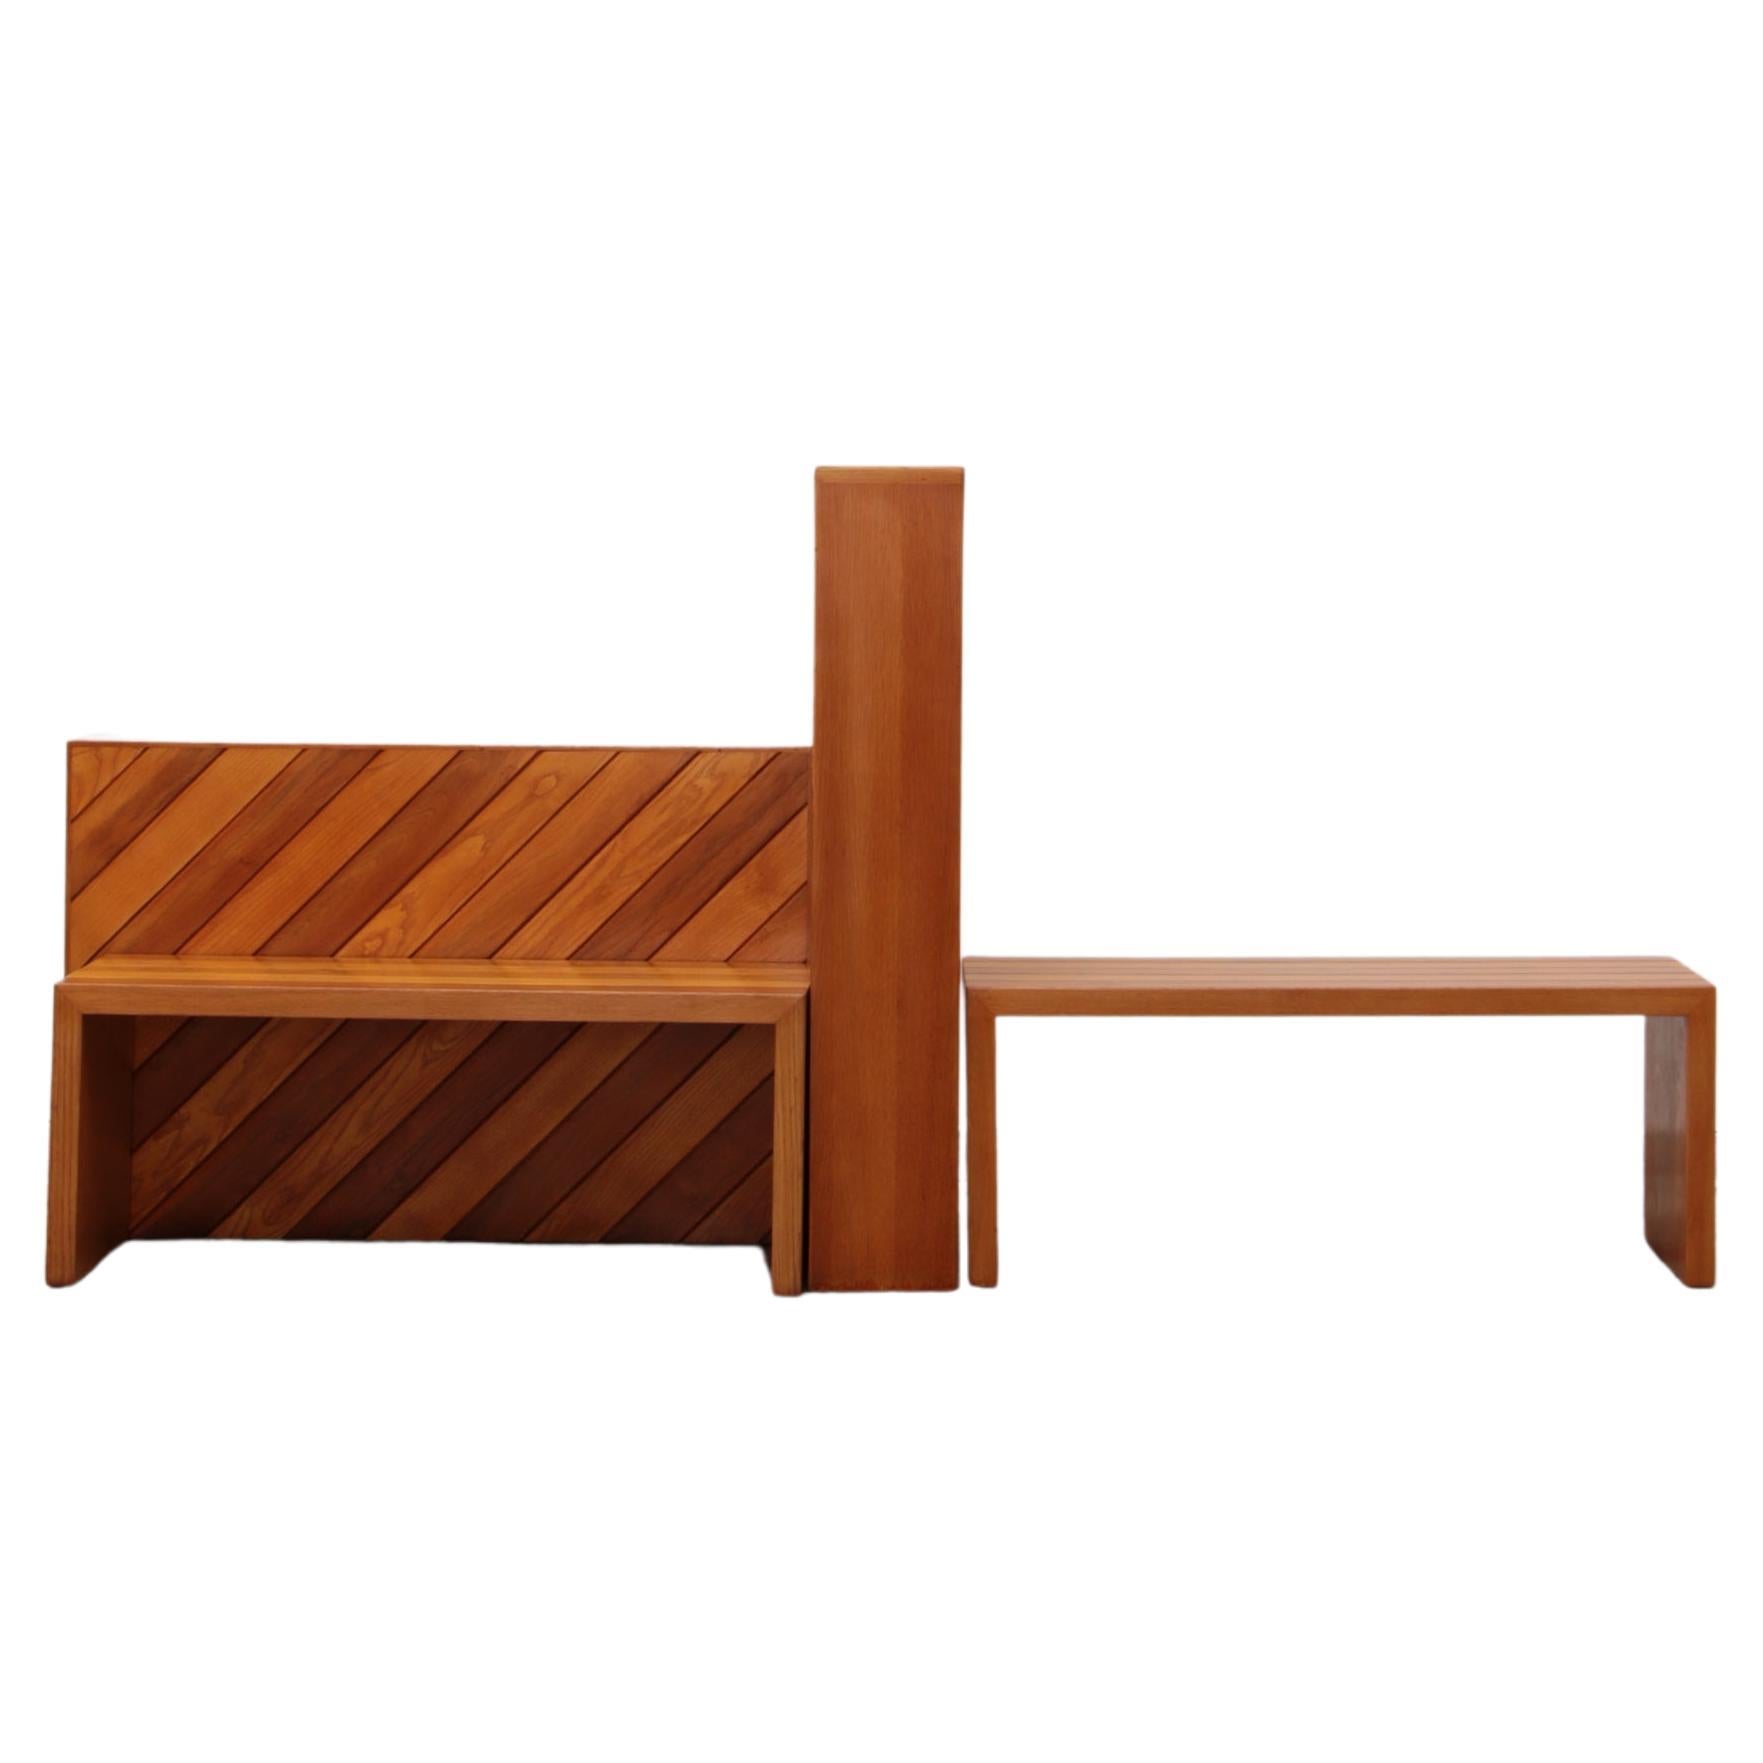 Italian Modernist Pine Bench & Table Set by Charlotte Perriand, 1960s, Set  of 3 for sale at Pamono